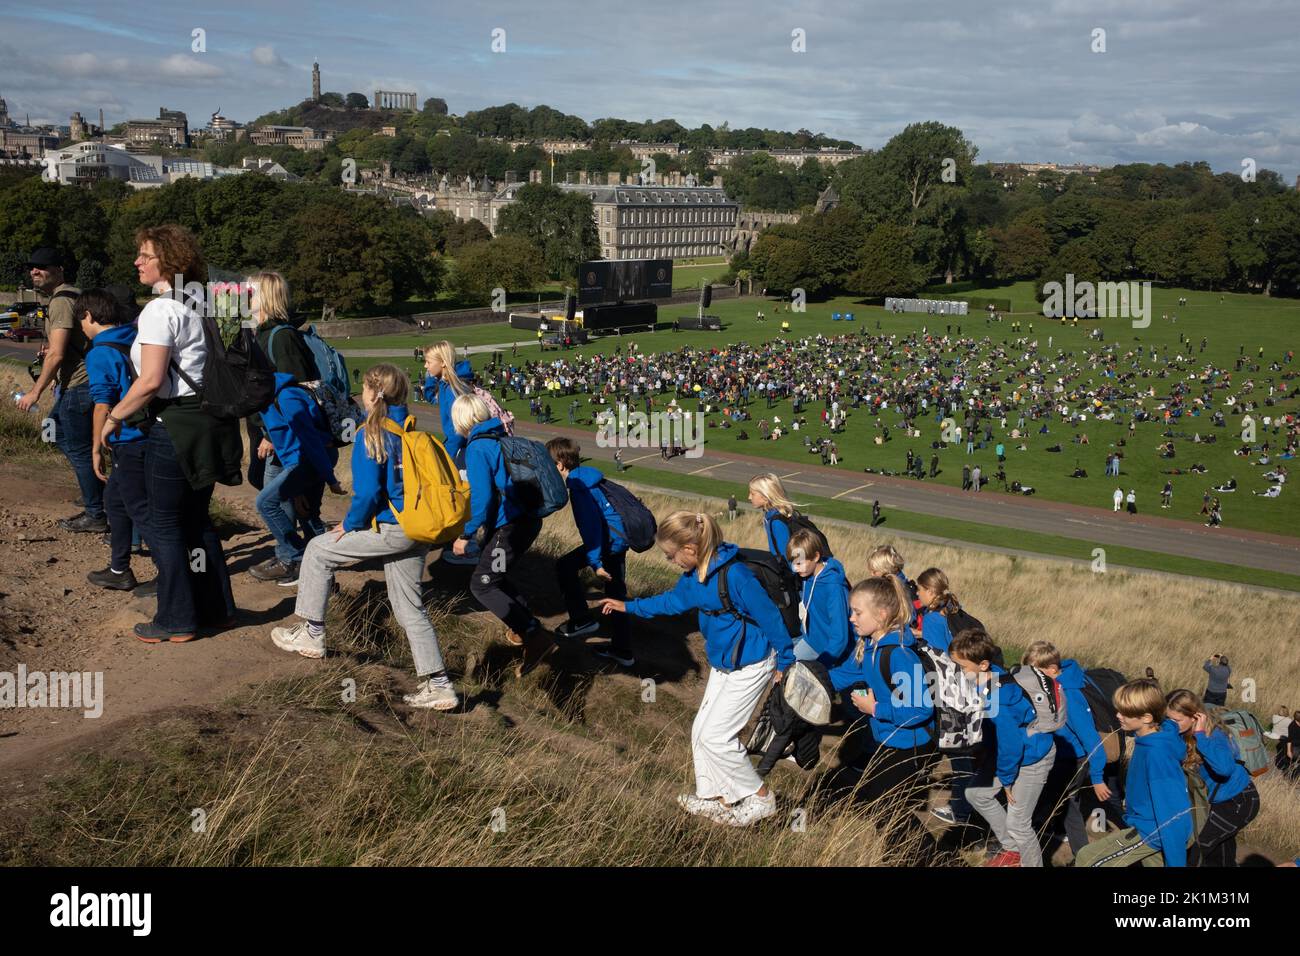 Edinburgh Scotland, 19 September 2022. In Holyrood Park, in front of the Royal family’s Palace of Holyroodhouse, crowds watch on a large screen the funeral in London of Her Majesty Queen Elizabeth II who died on 8th September, in Edinburgh Scotland, 19 September 2022. Photo credit: Jeremy Sutton-Hibbert/Alamy Live News. Stock Photo